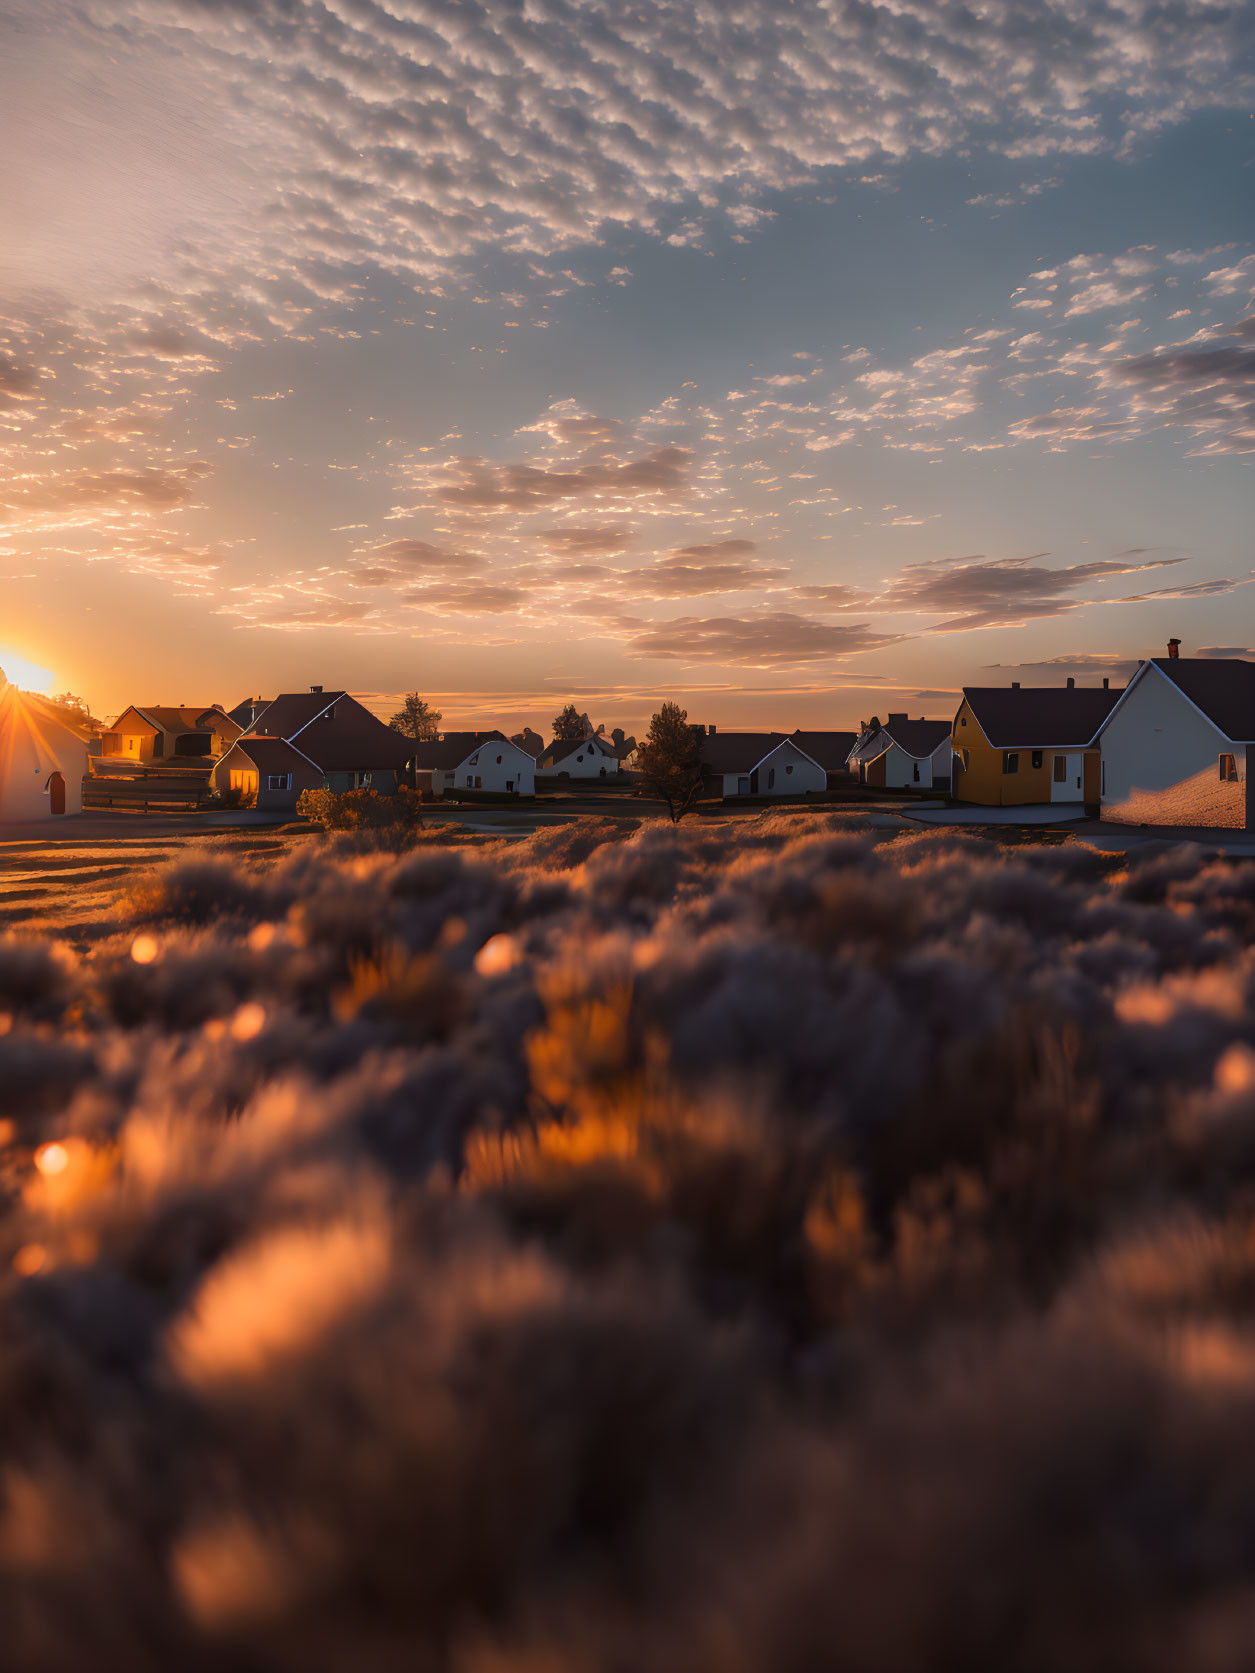 Suburban Neighborhood at Sunset with Lavender Field and Textured Clouds